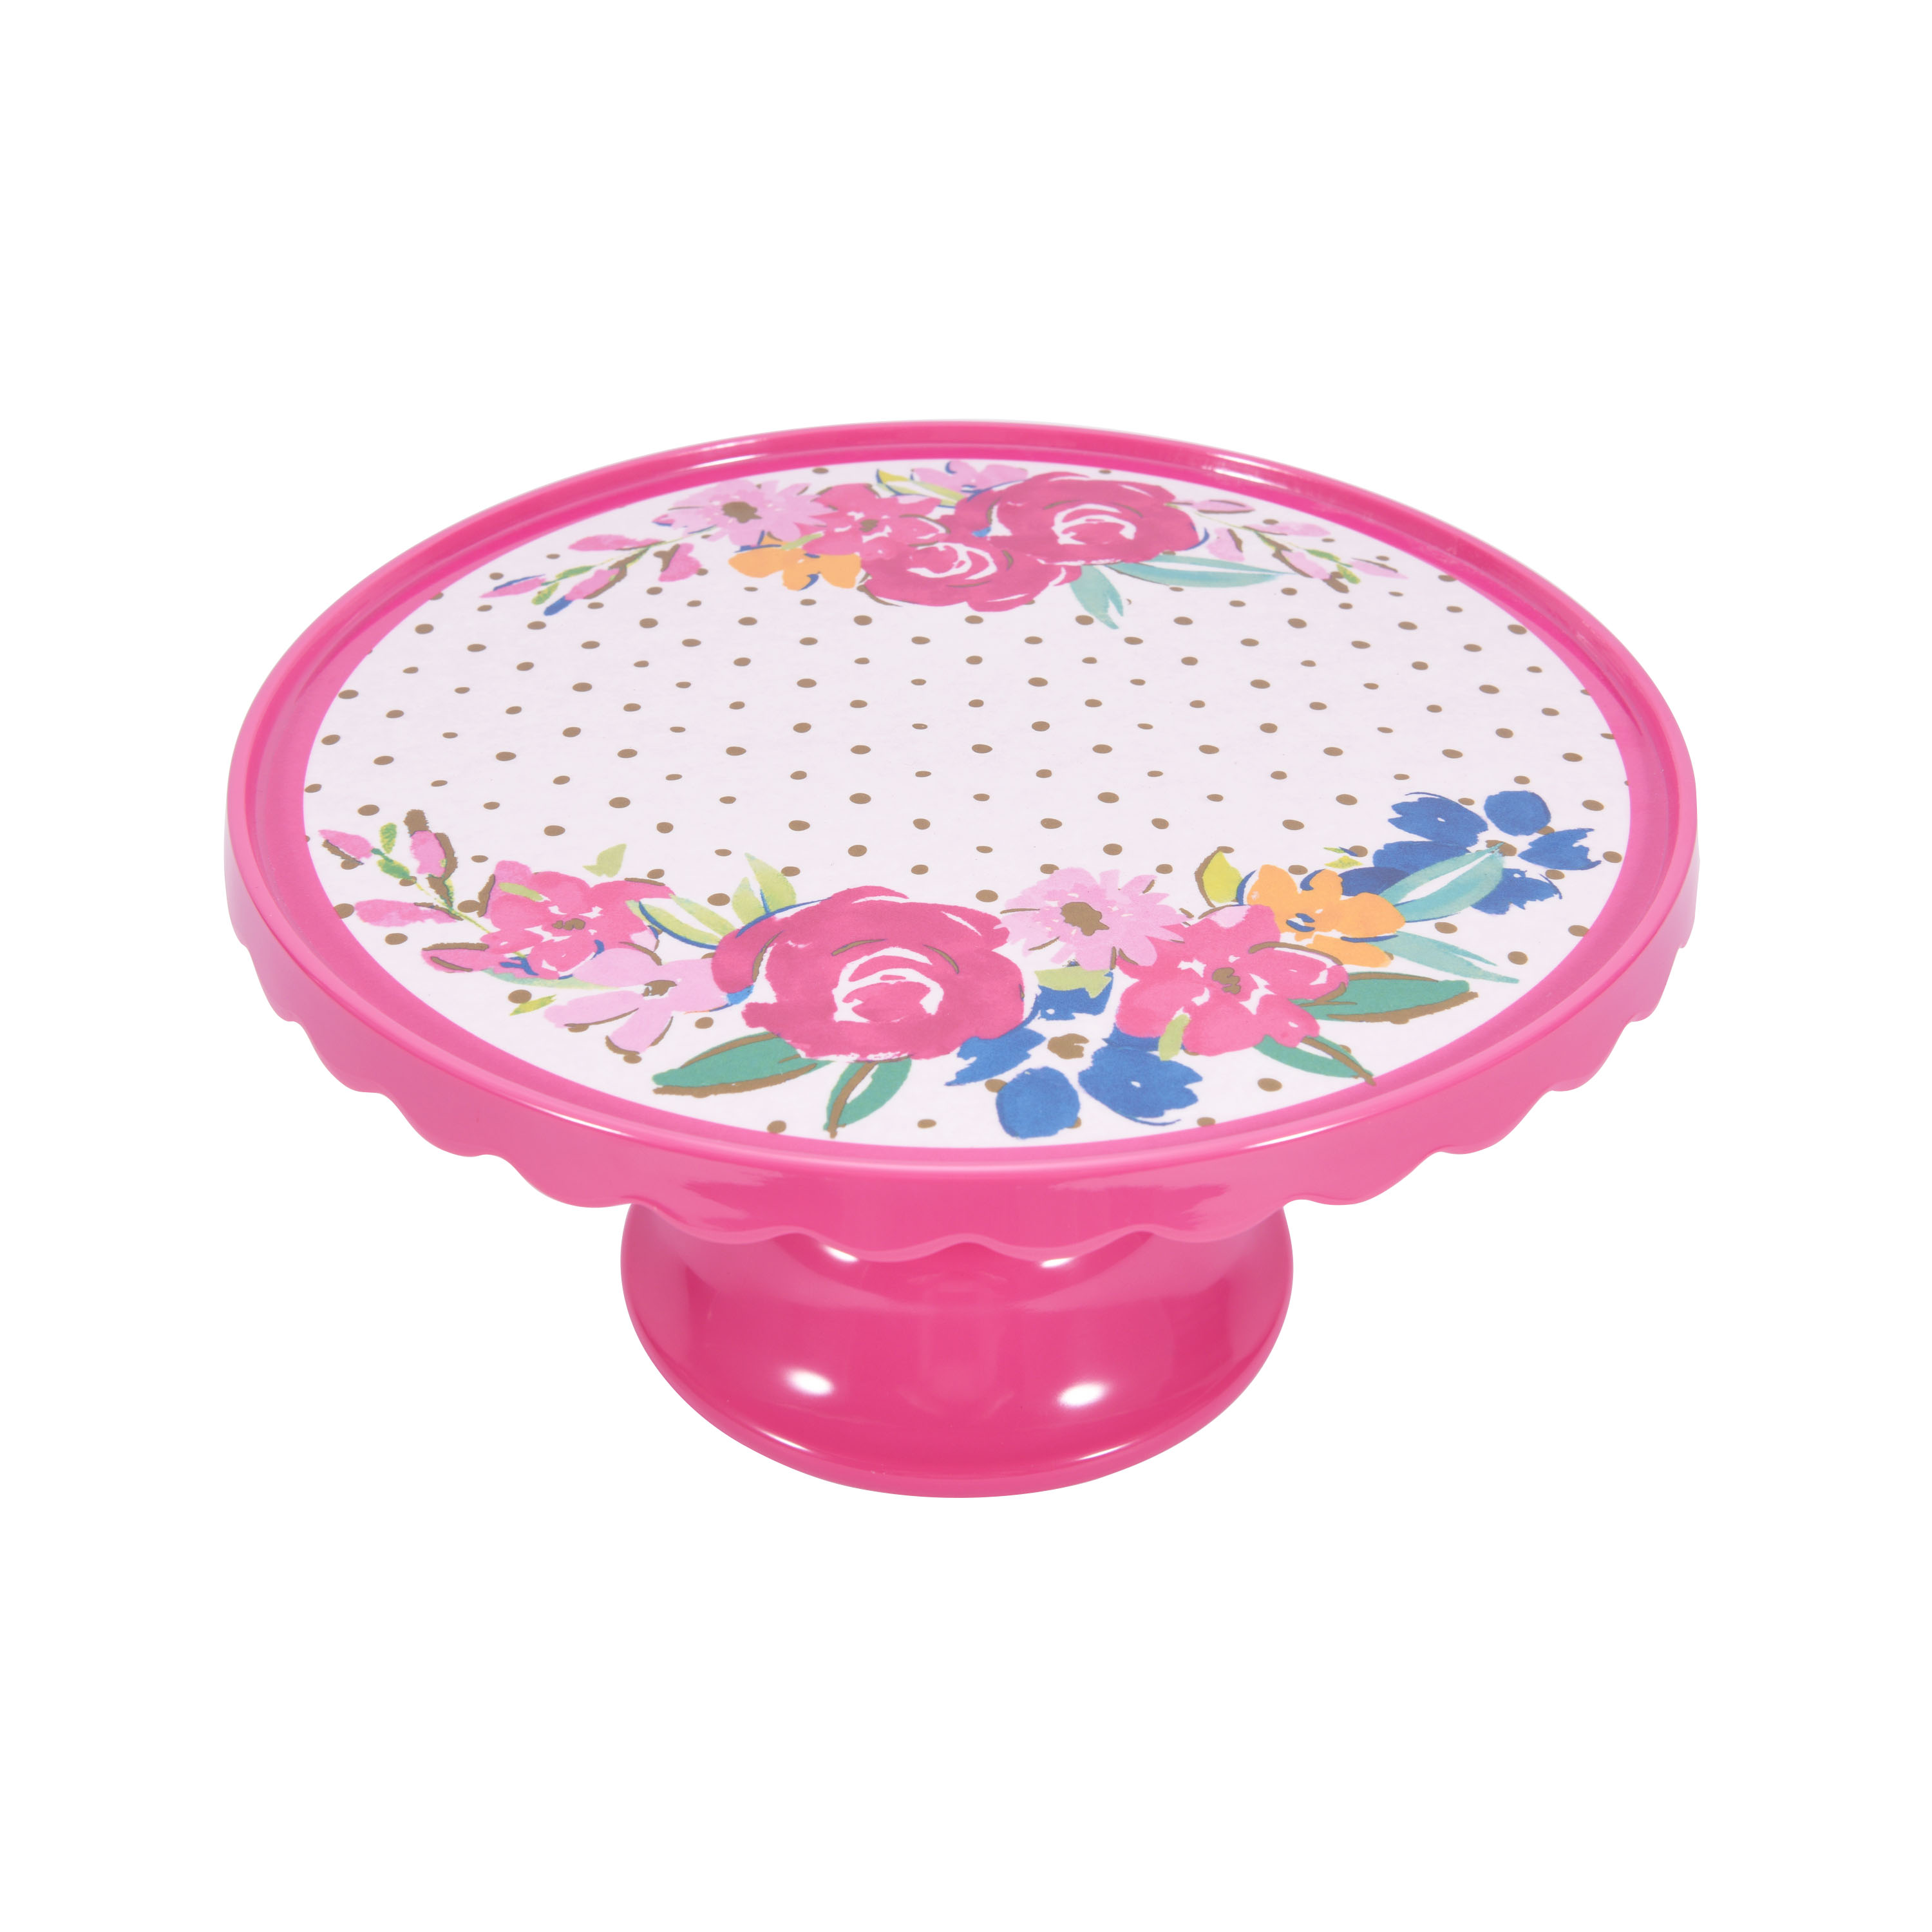 The Pioneer Woman 11-inch Cake Stand Assortment - image 2 of 4